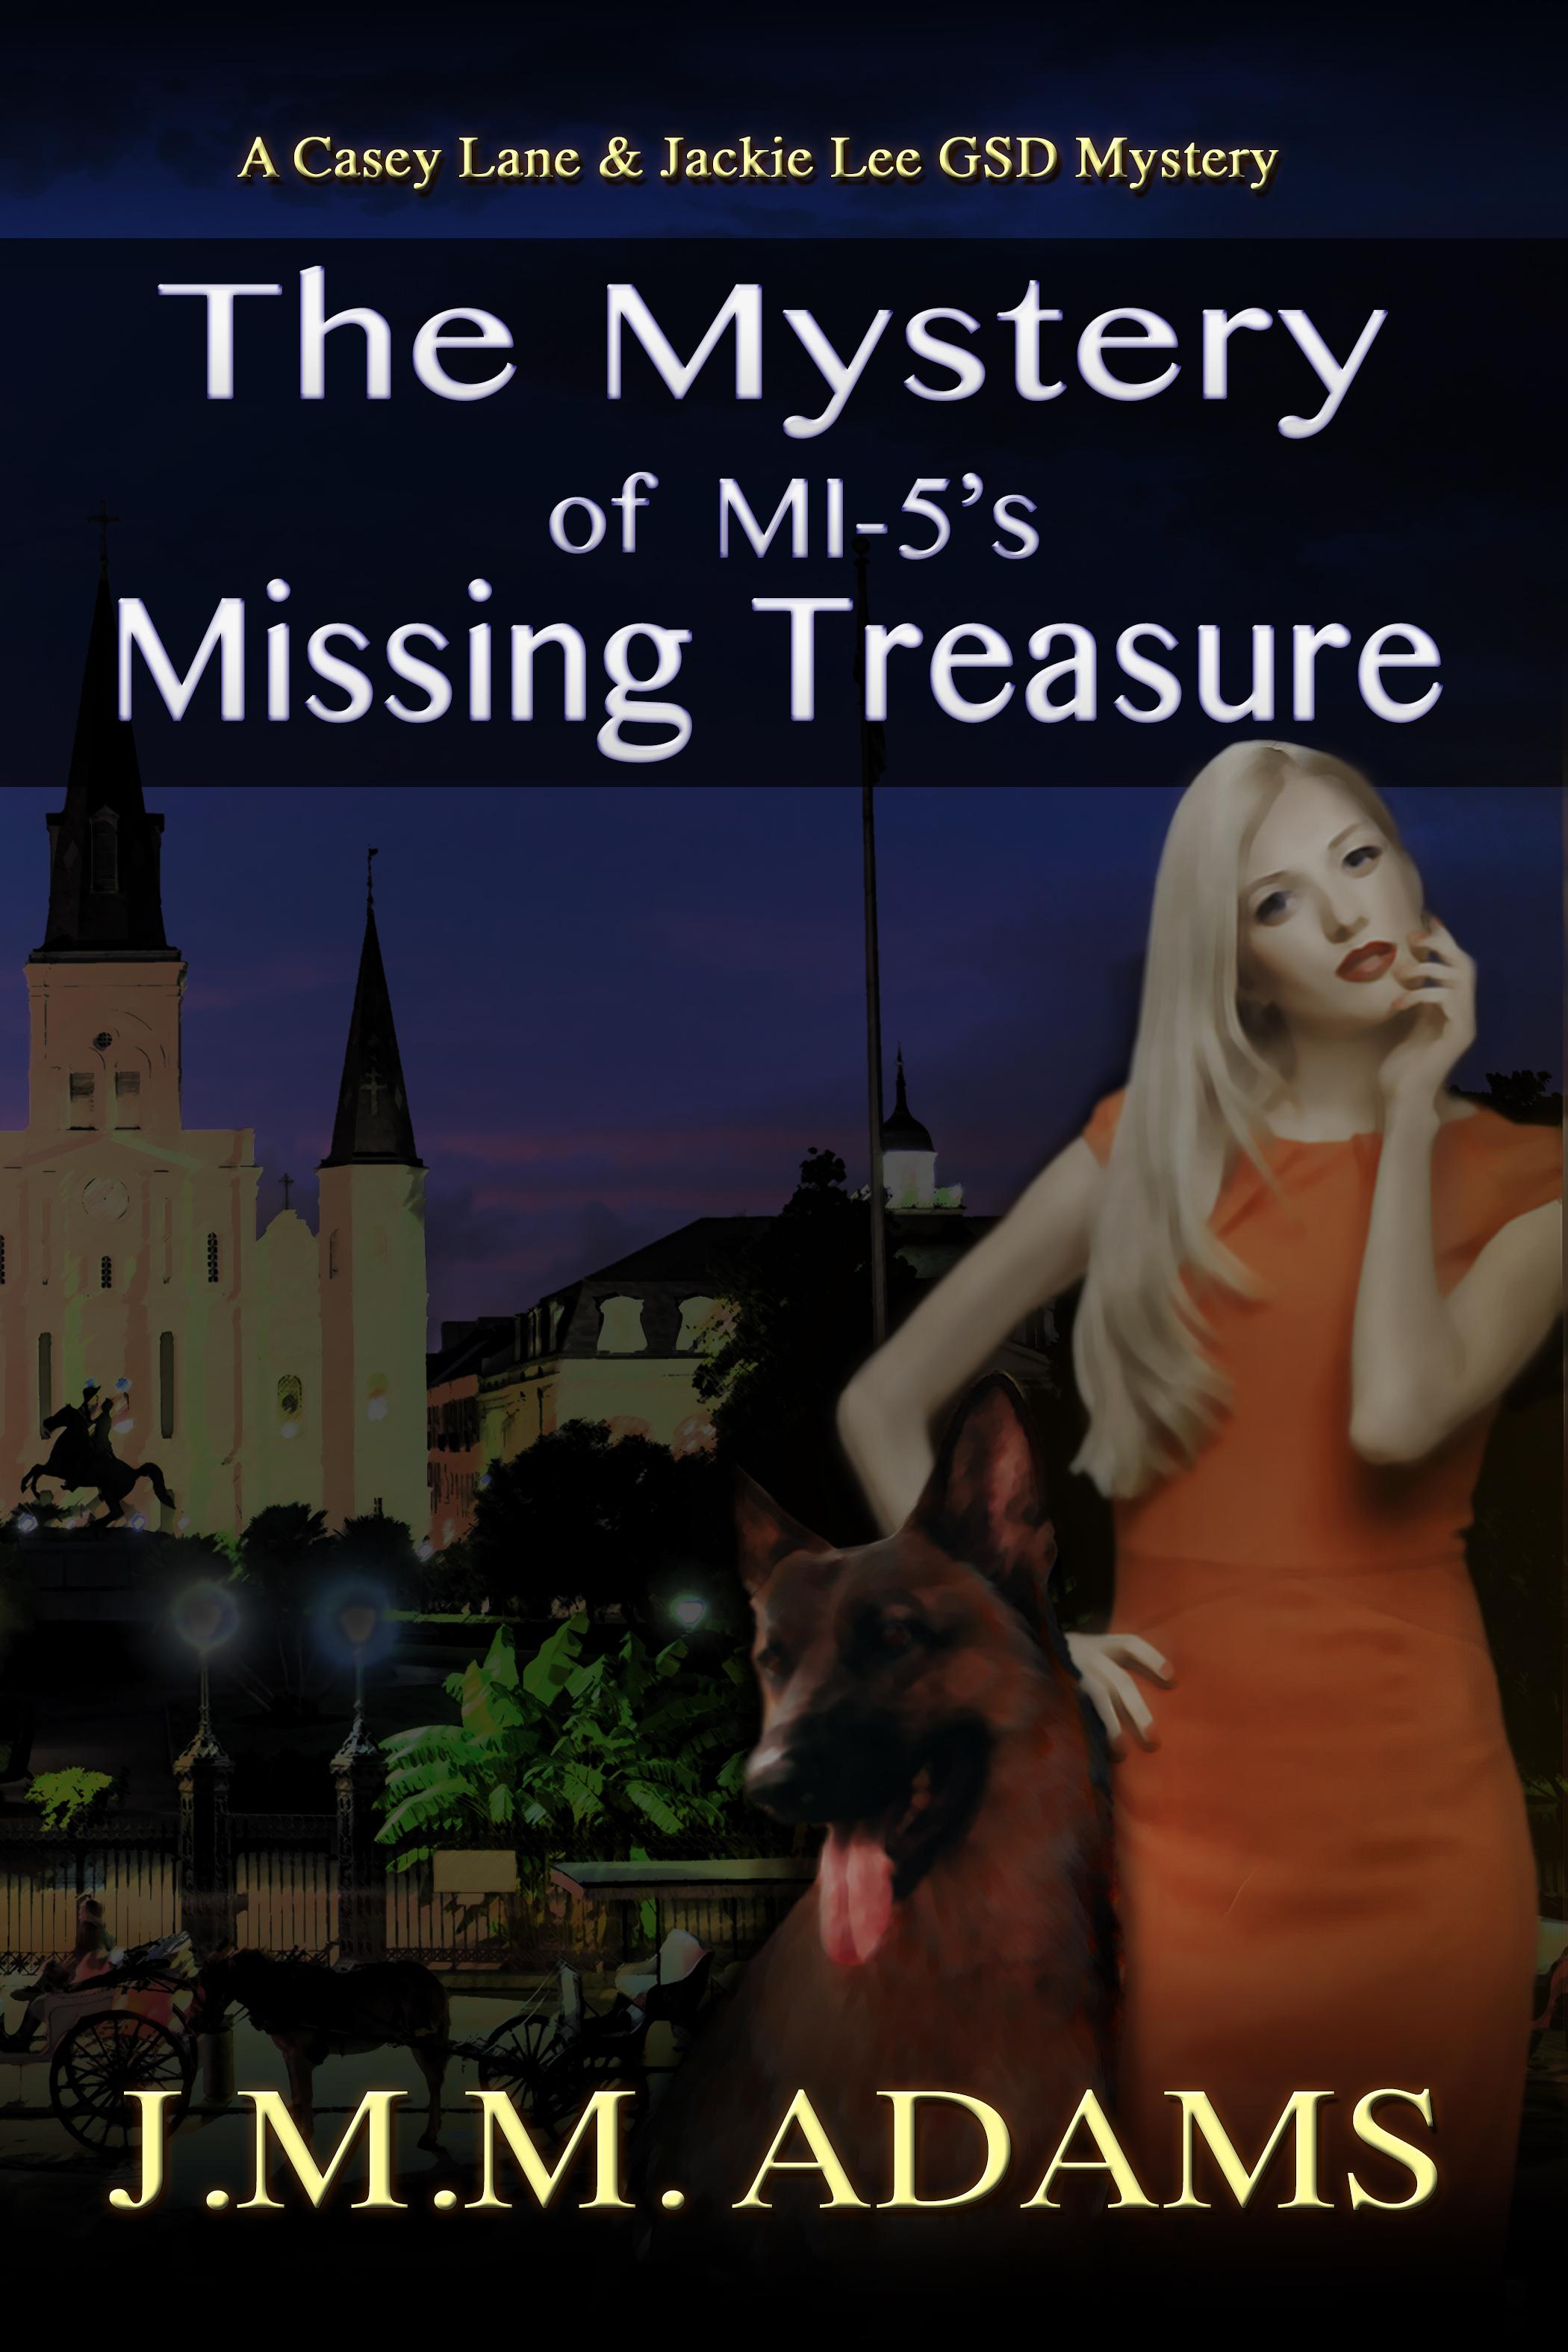 The-Mystery-of-MI-5s-Missing-Treasure-or